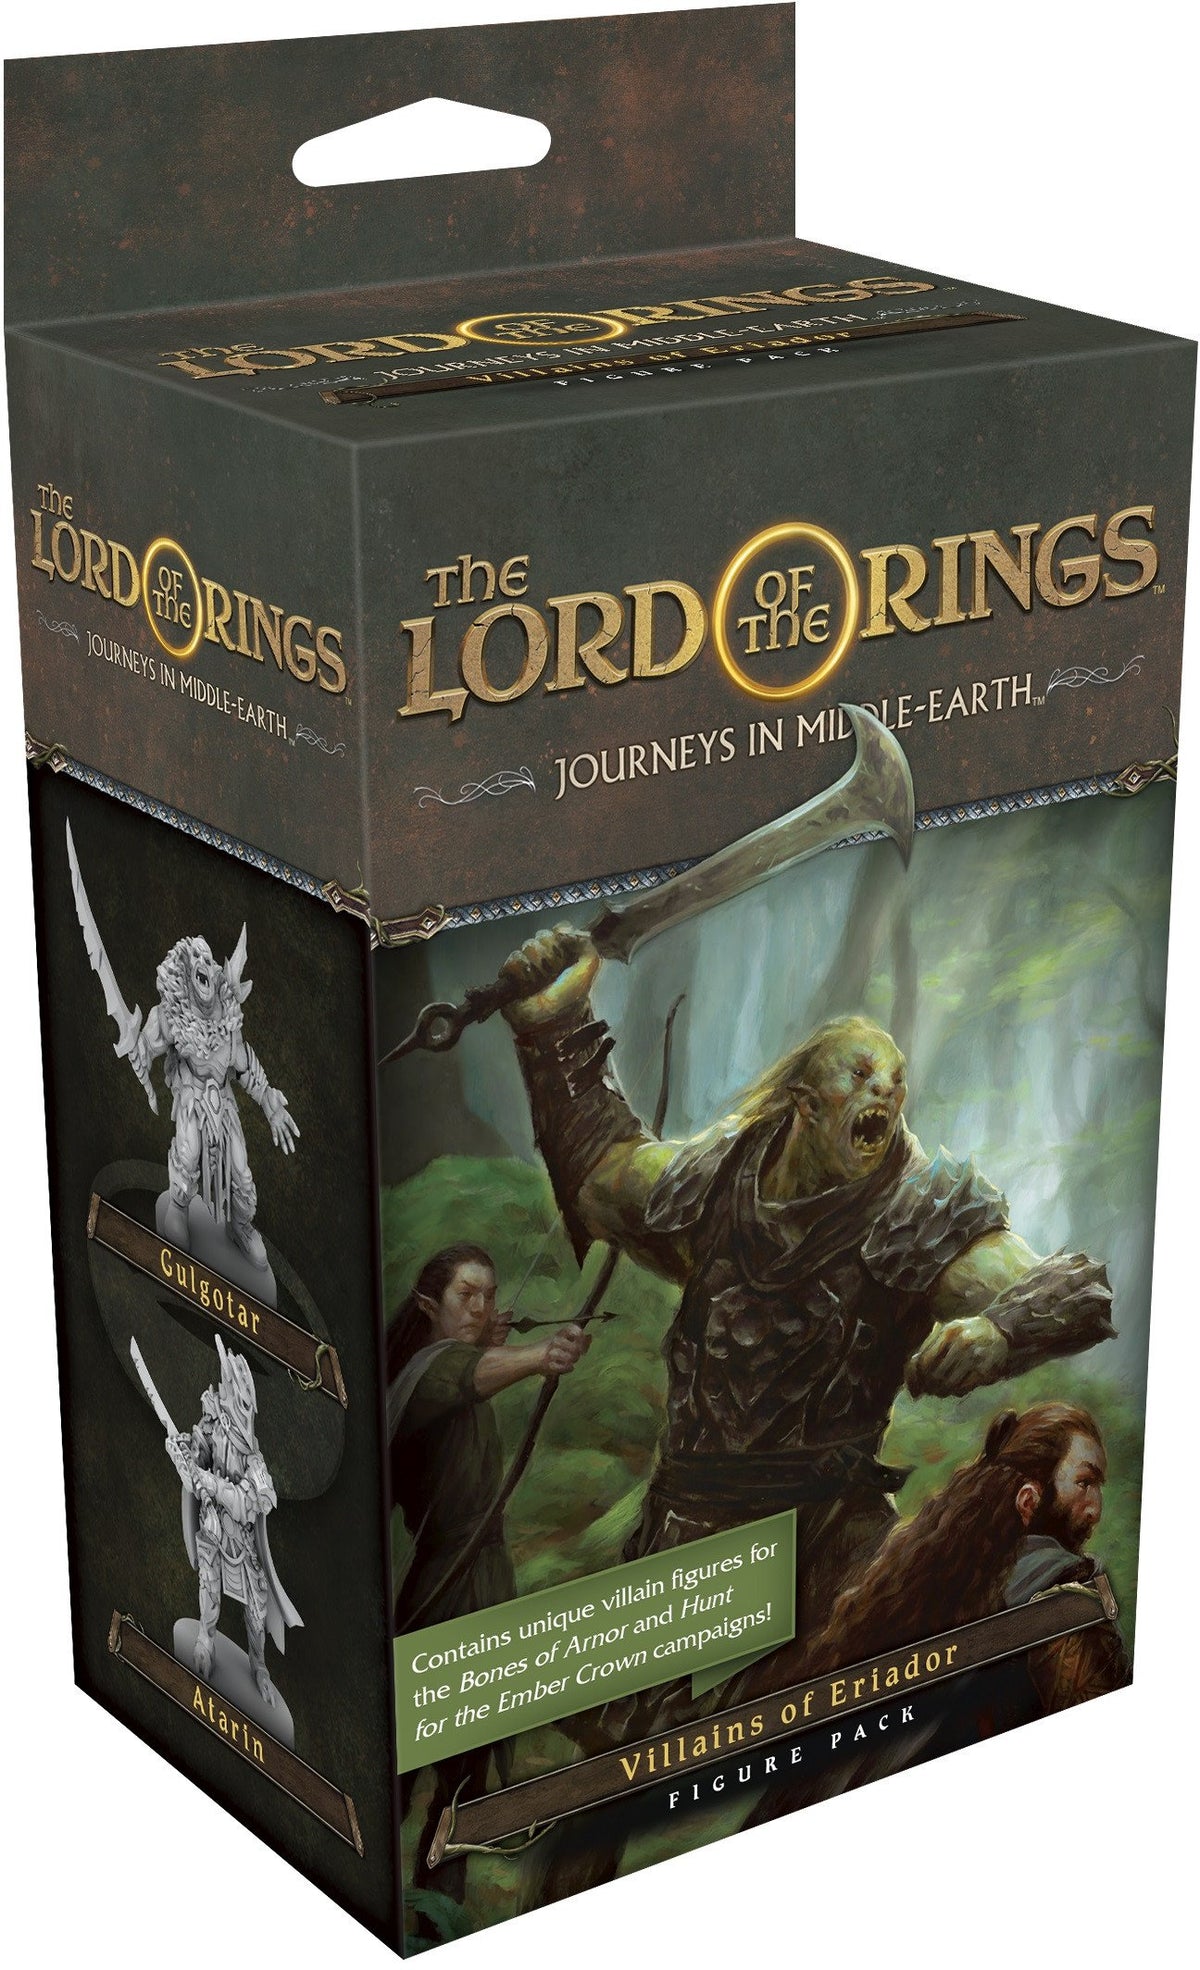 The Lord of the Rings: Journeys in Middle-Earth - Villains of Eriador (Figure Pack Expansion)